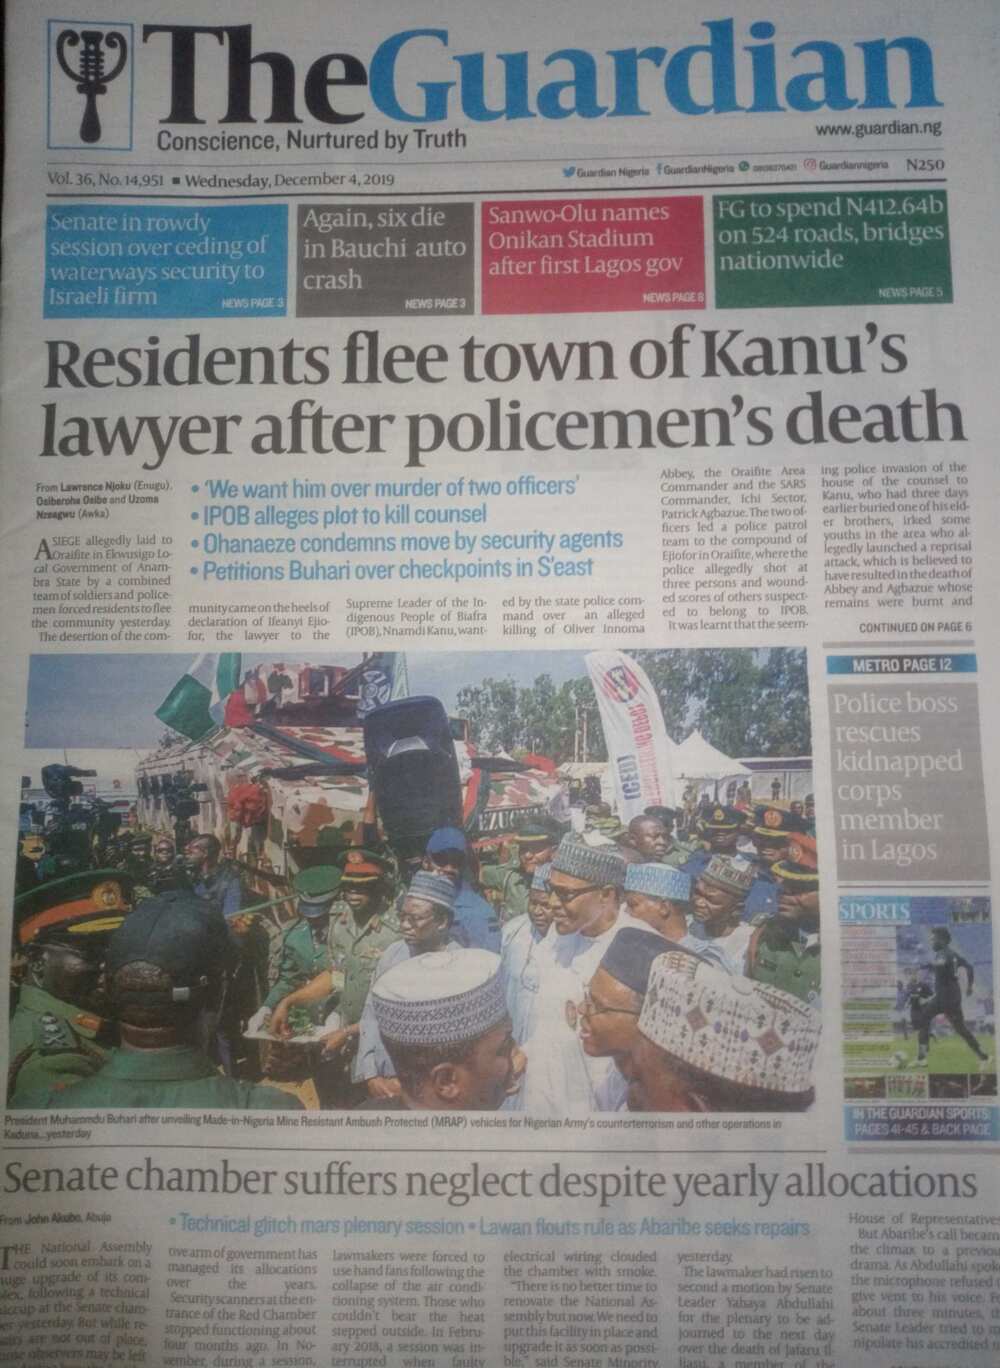 The Guardian newspaper review of December 4